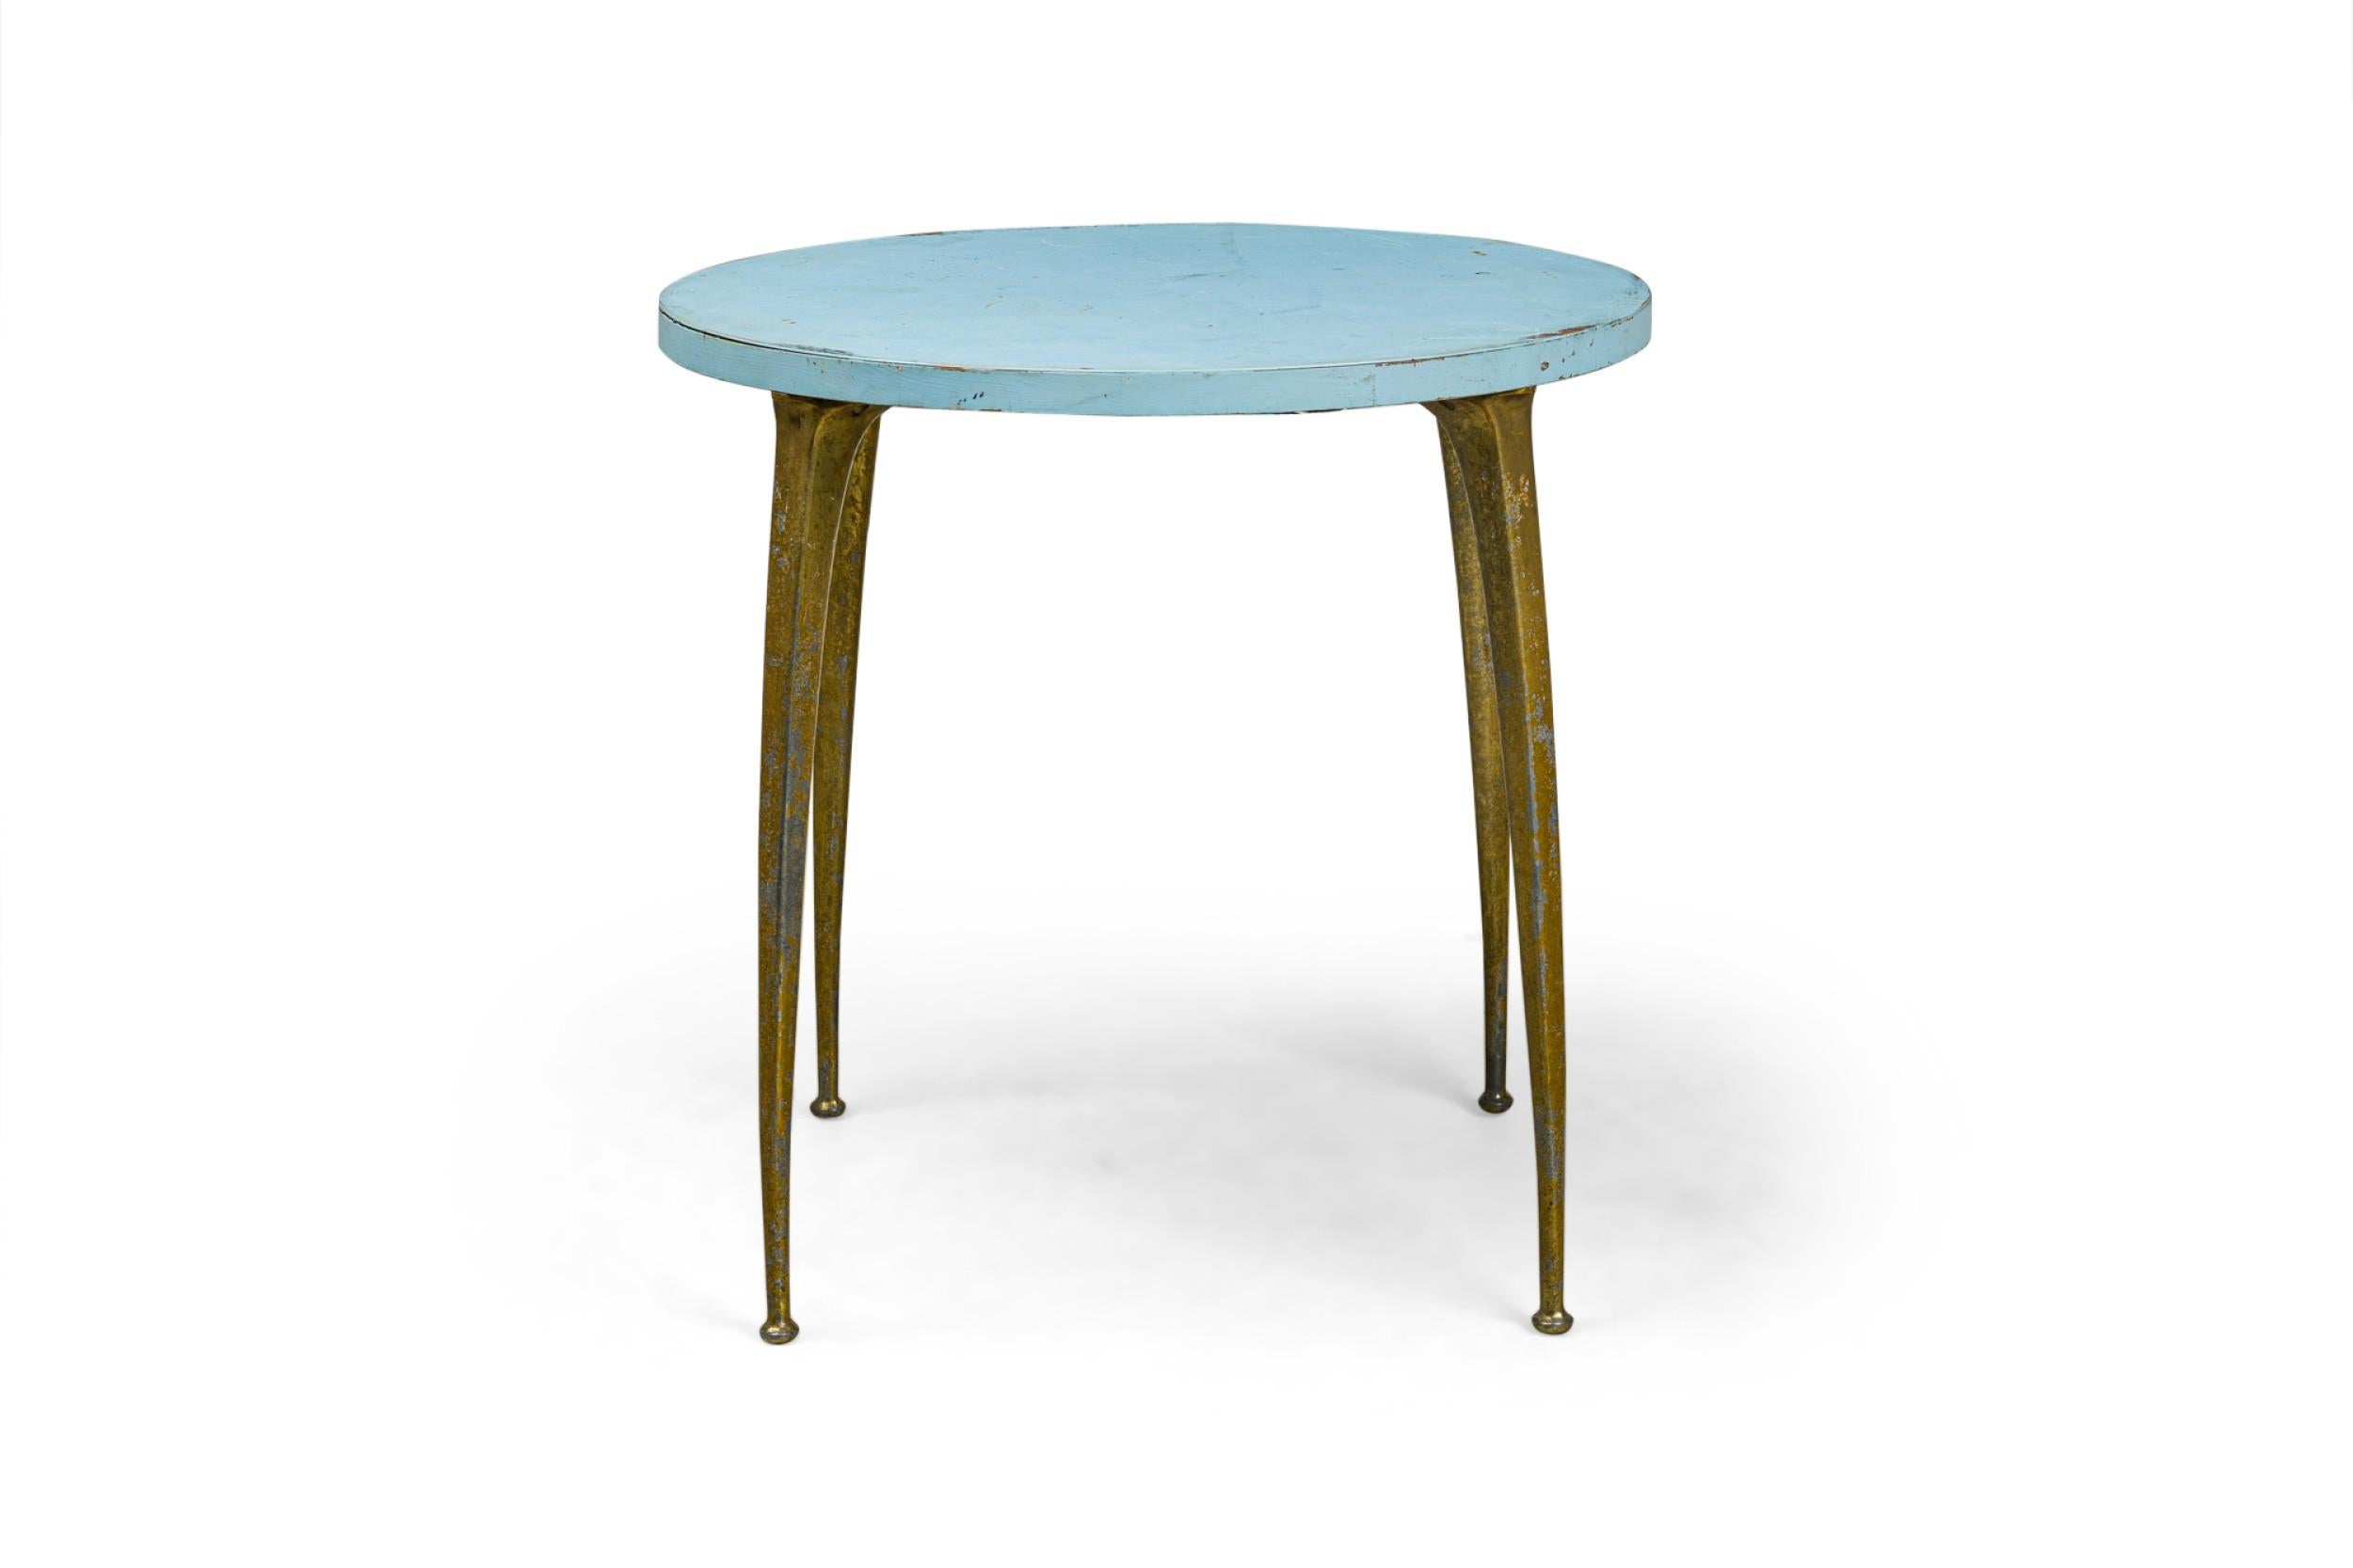 Italian Modern Enameled Wood & Brass Center / Breakfast Table, Style of Ponti In Good Condition For Sale In New York, NY